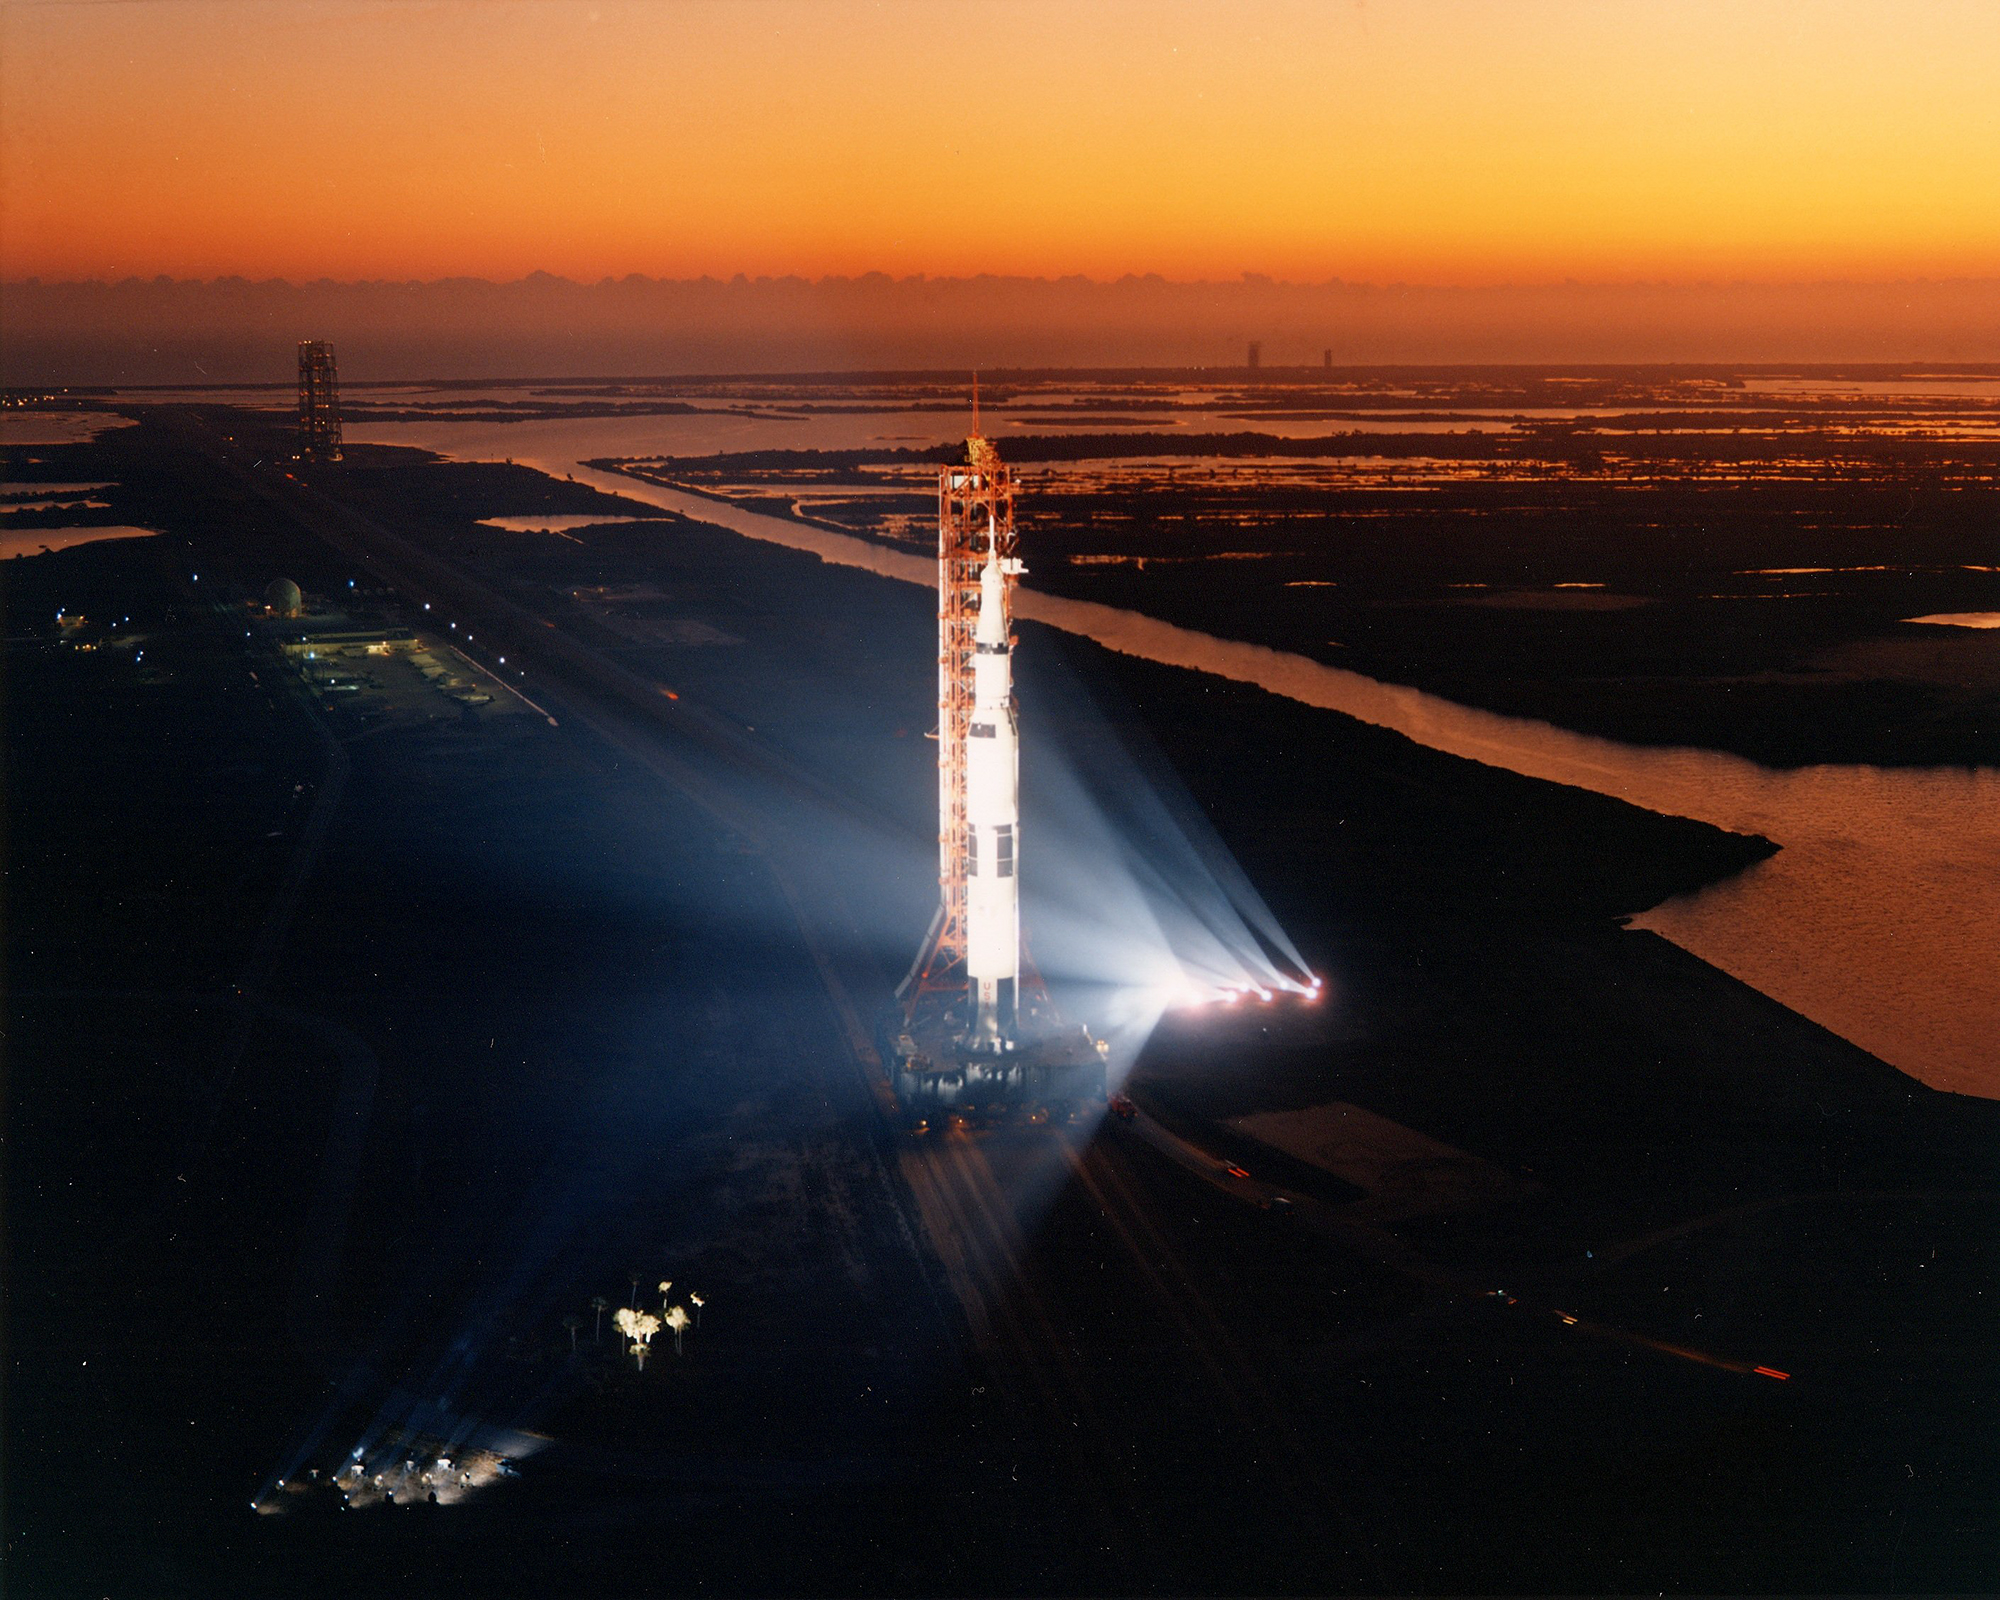 apollo-13-bathed-in-floodlight-during-early-morning-rollout.jpg